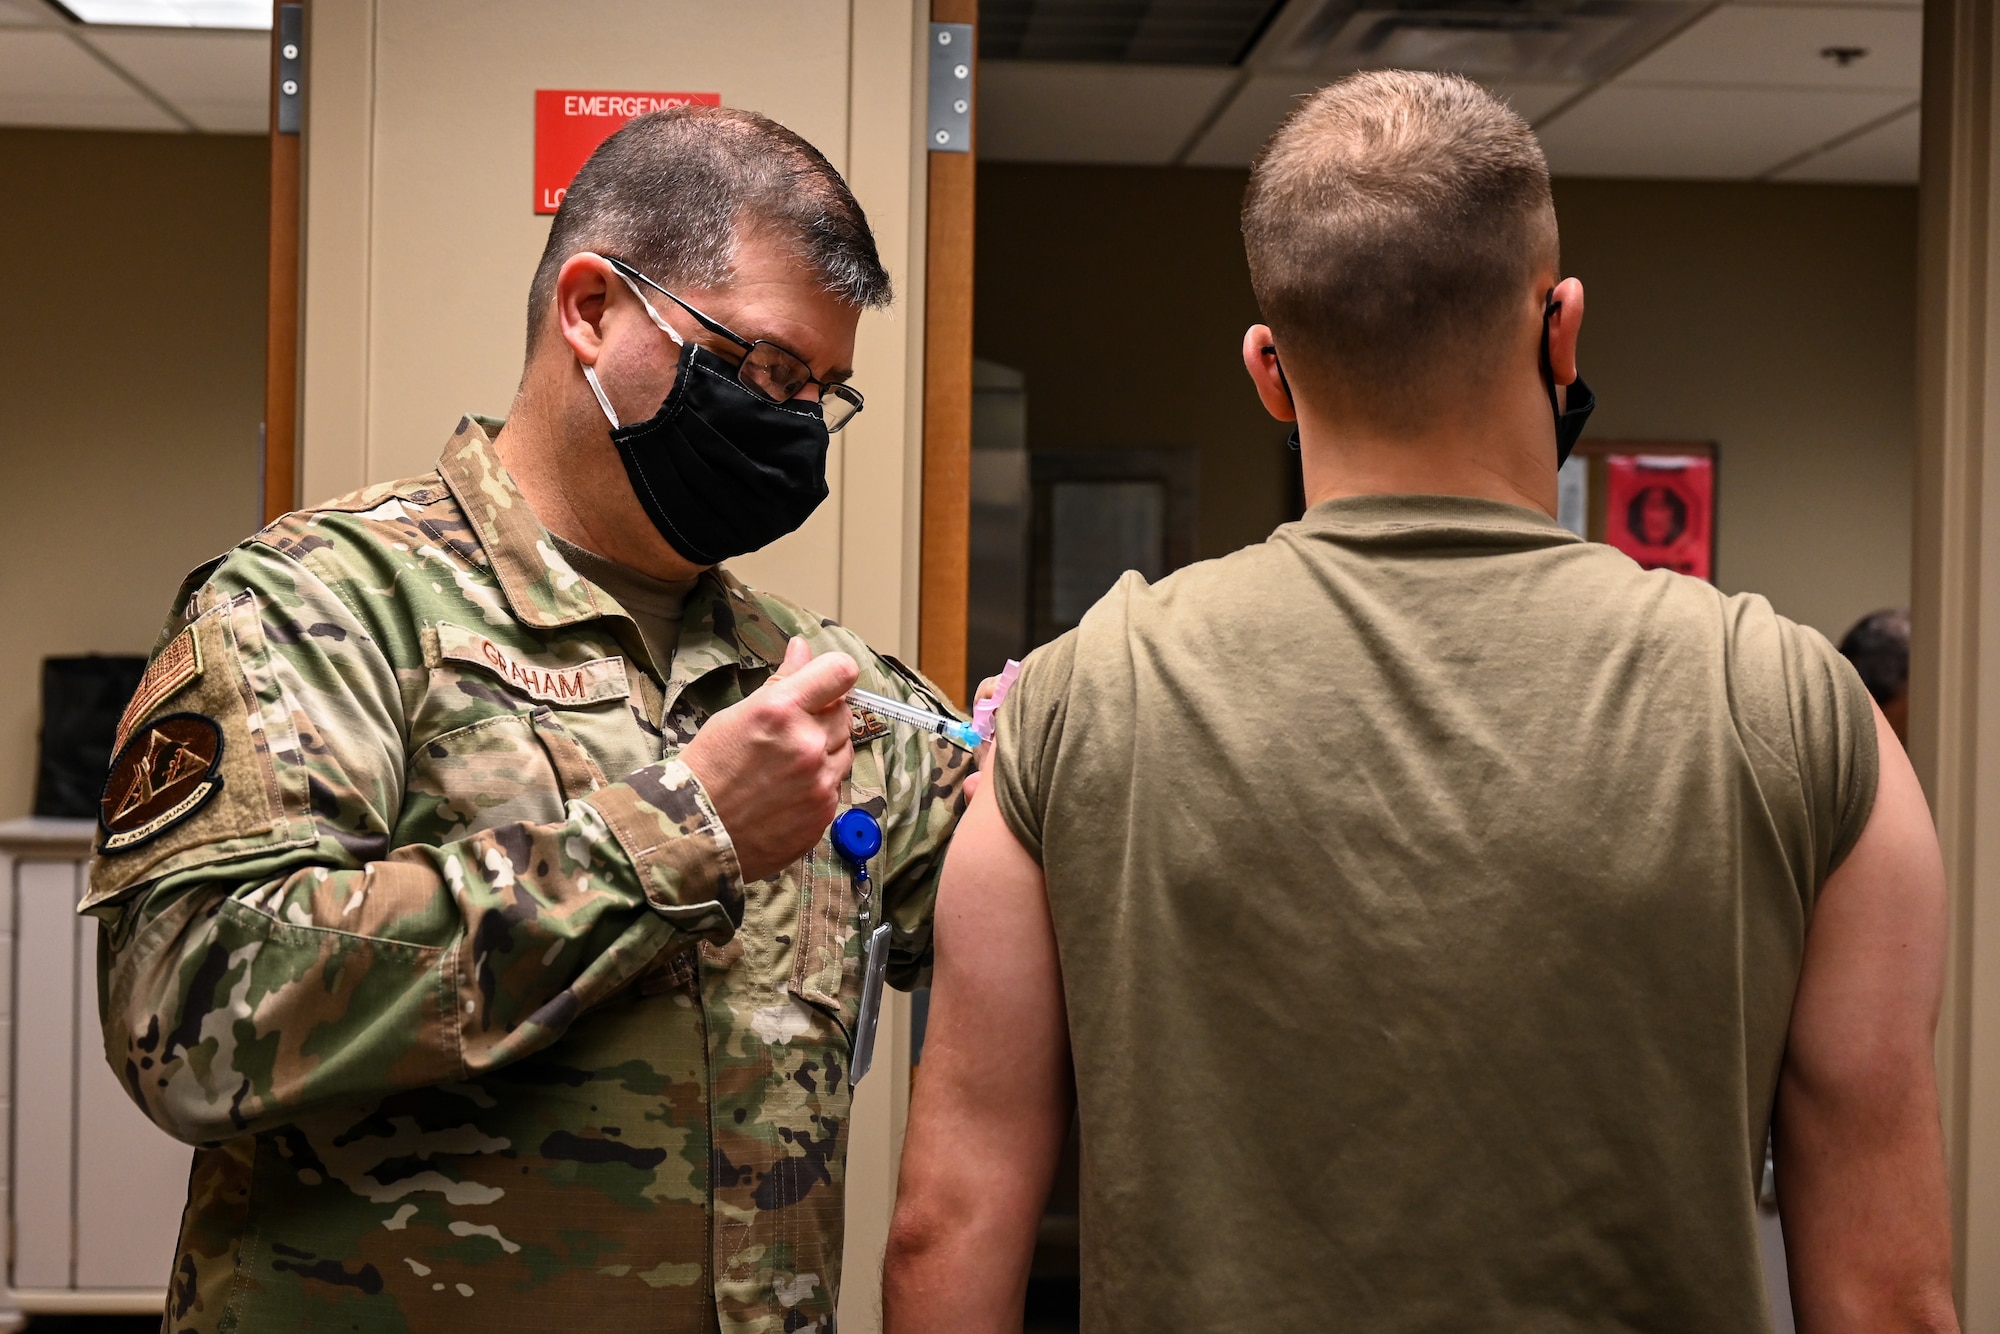 Airmen from the 2nd Medical Group receive the first doses of the COVID-19 vaccination at Barksdale Air Force Base, La., Jan. 6, 2021. Vaccination distribution prioritization within the Department of Defense will be consistent with data-driven guidance from the Centers for Disease Control and Prevention. (U.S. Air Force photo by Senior Airman Christina Graves)